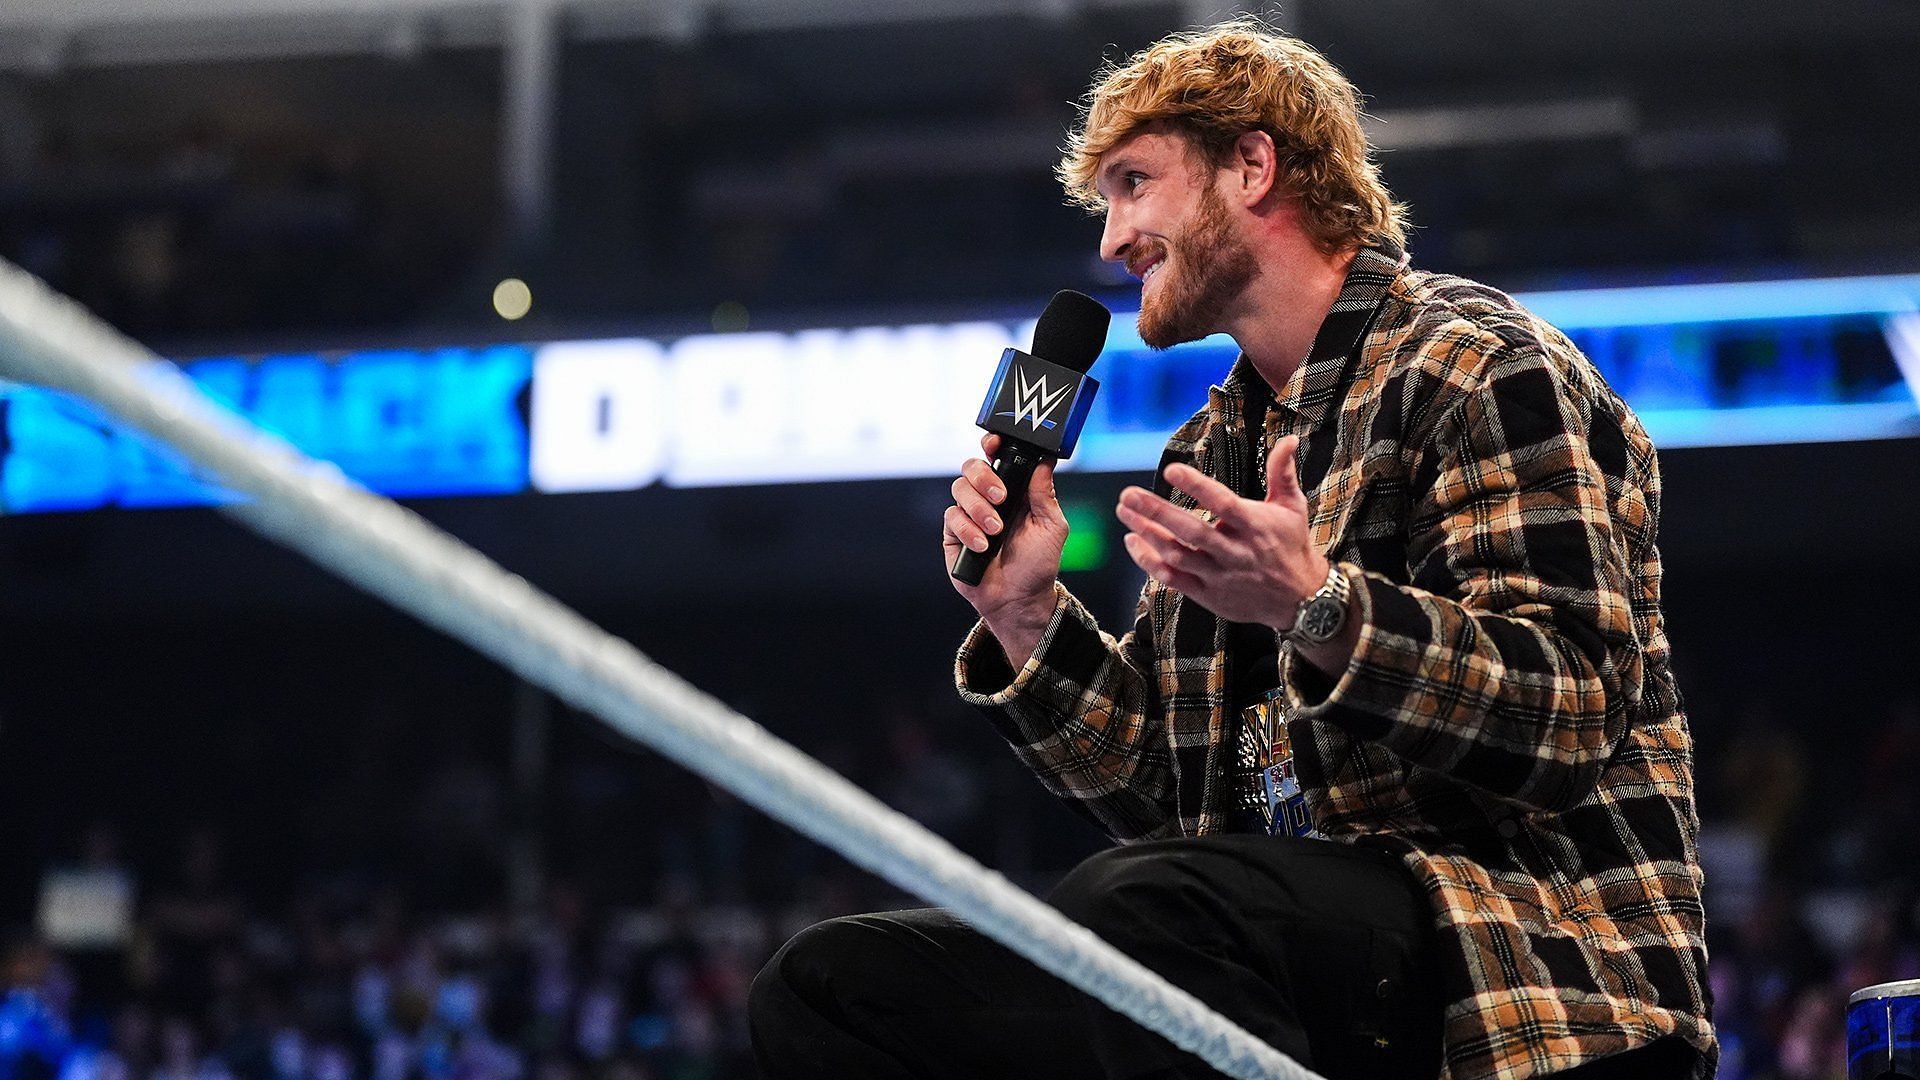 Logan Paul speaks from the ring on WWE SmackDown